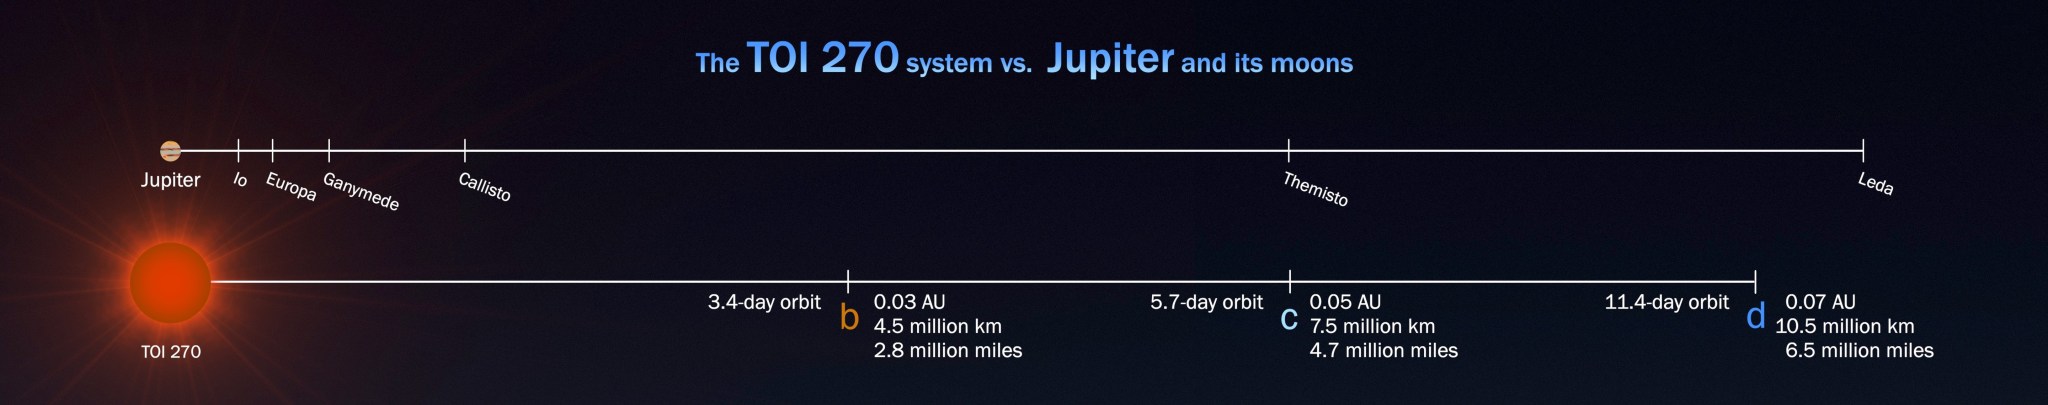 comparison of TOI 270 system to orbits of Jupiter and its moons